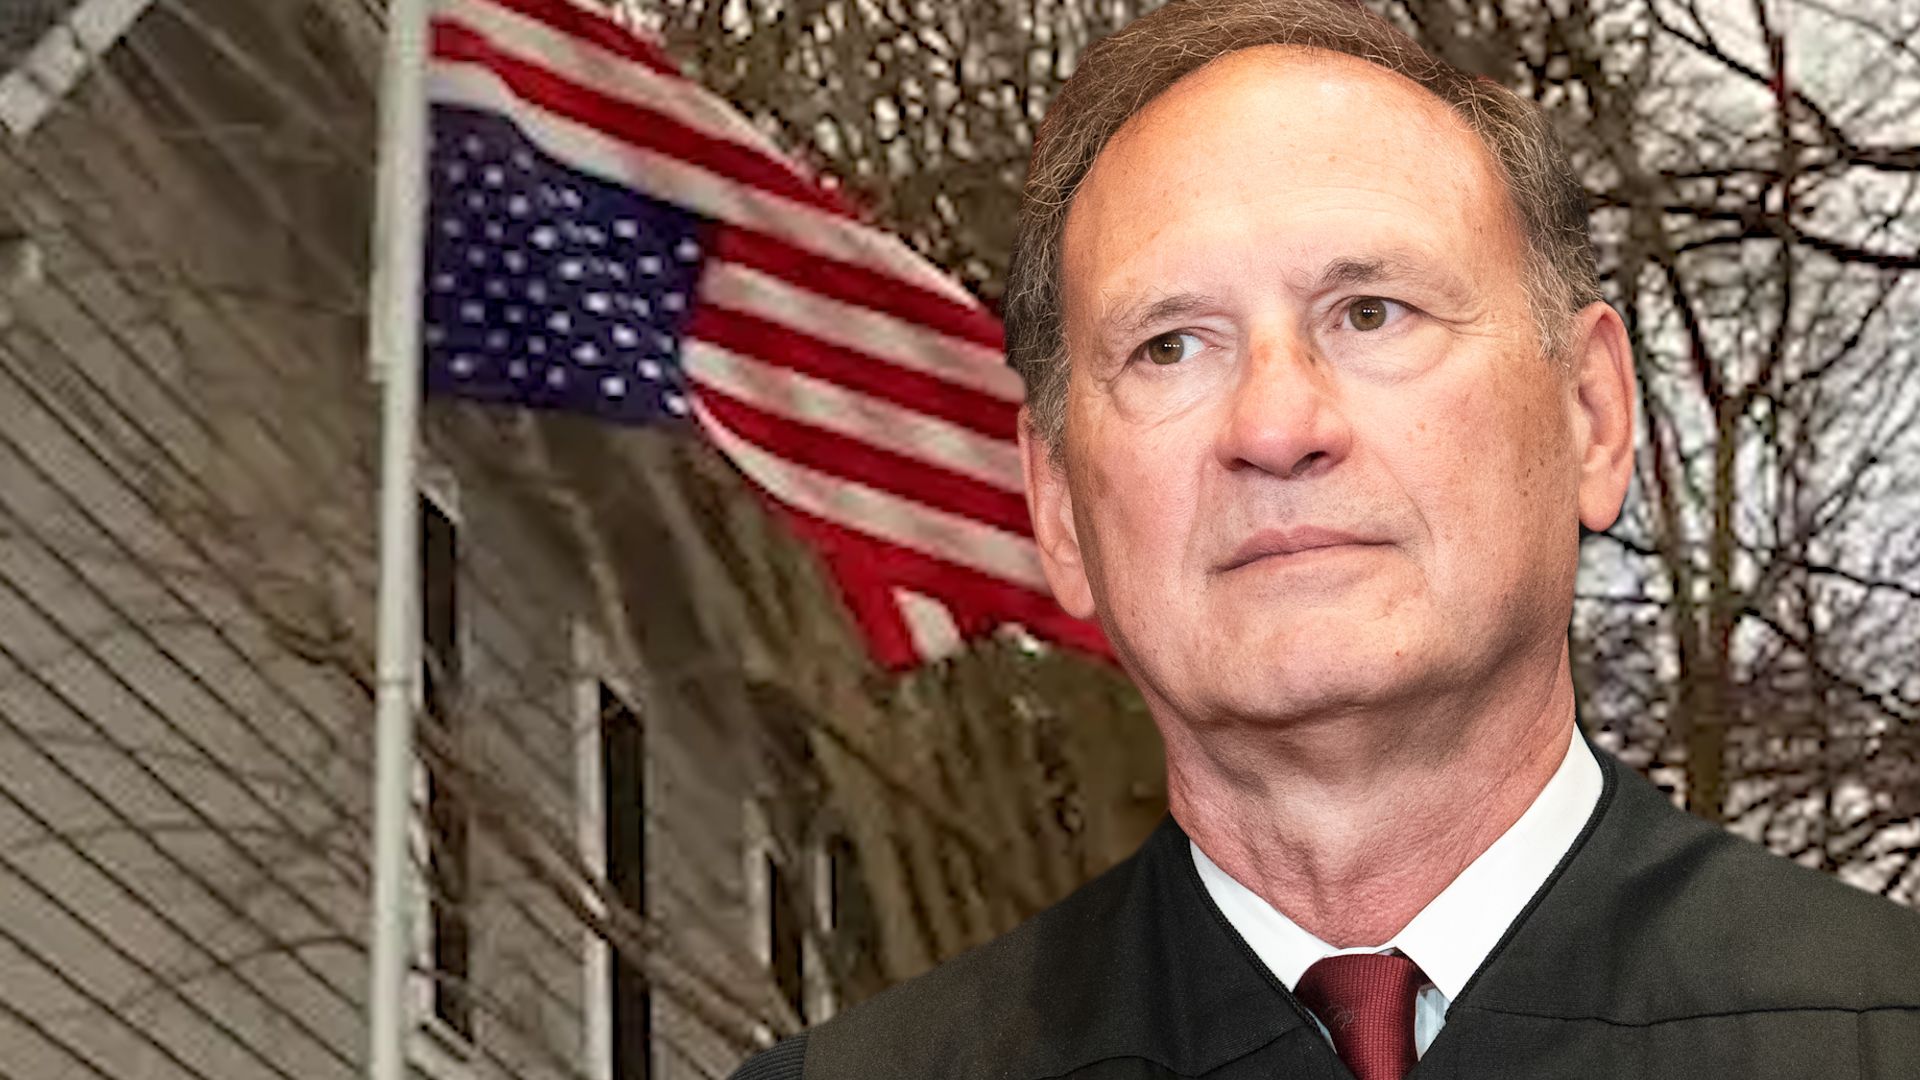 A New York Times report ignited controversy about Supreme Court Justice Samuel Alito’s display of an upside-down American flag at his home.